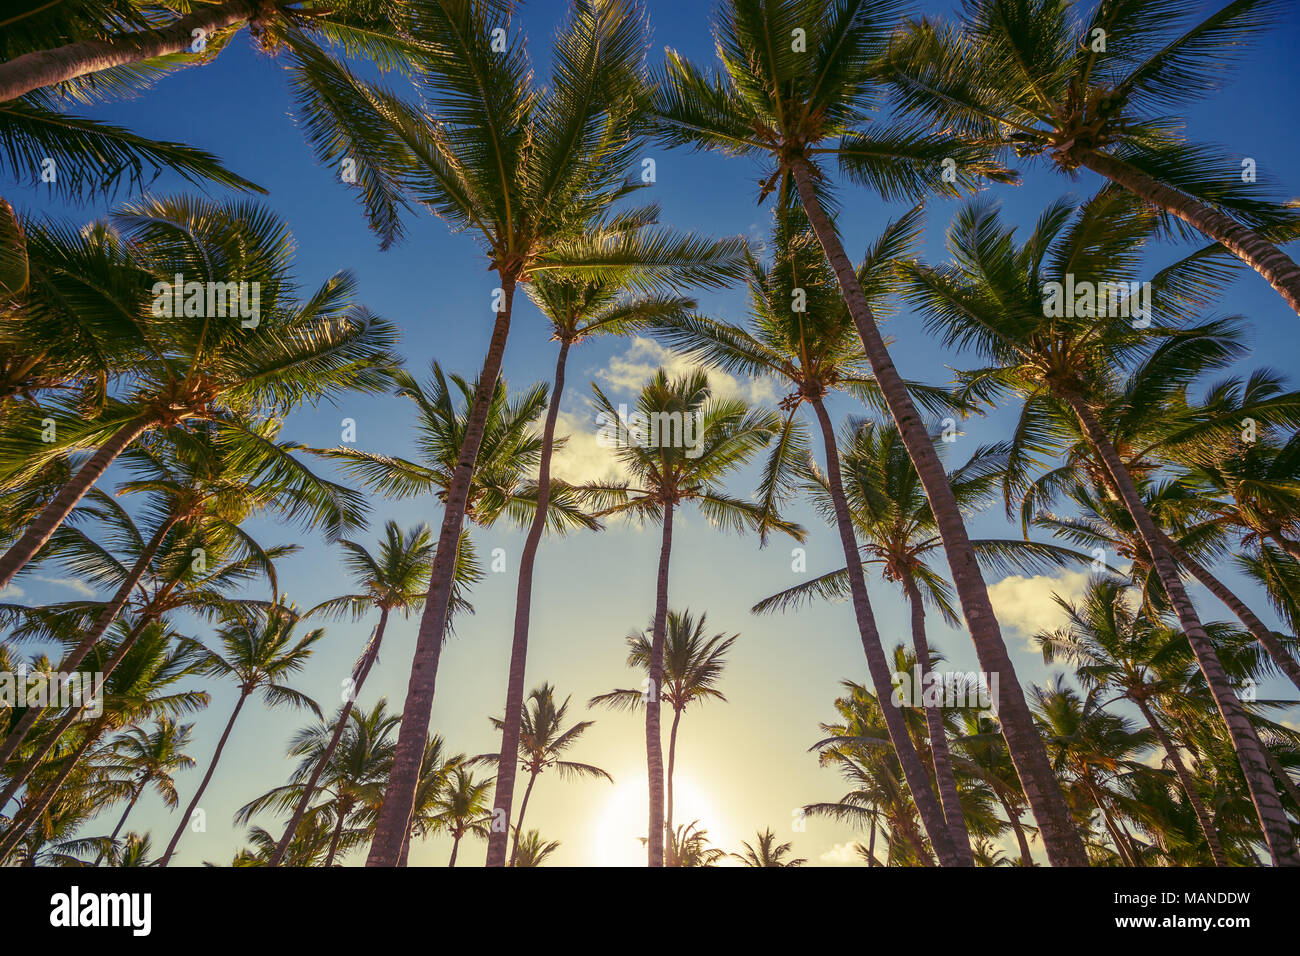 Coconut palm trees perspective view, sunrise shot Stock Photo